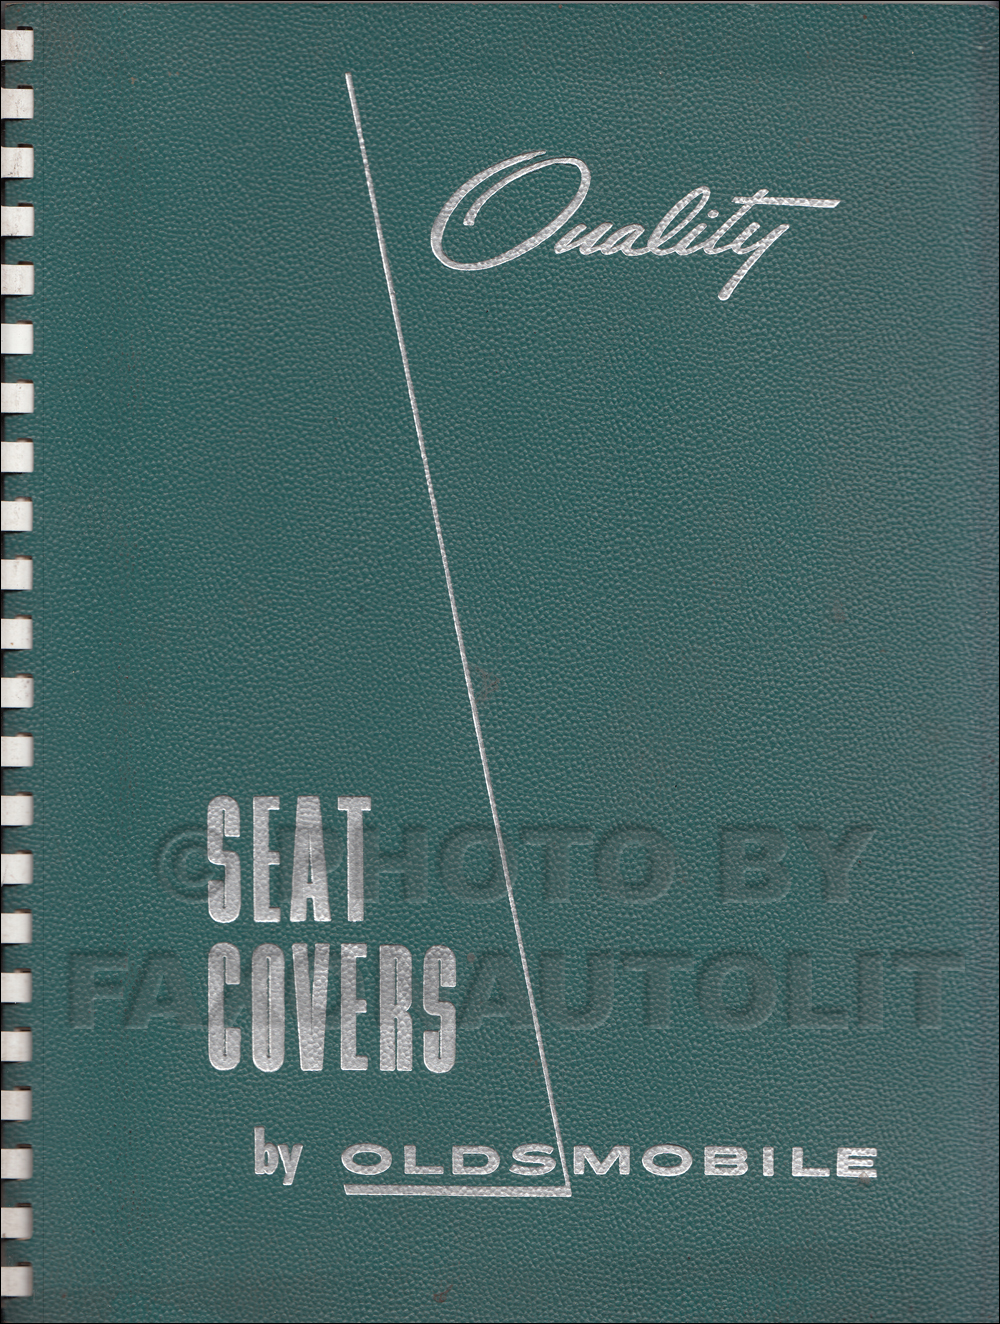 1955 Oldsmobile Seat Cover Fabric Samples